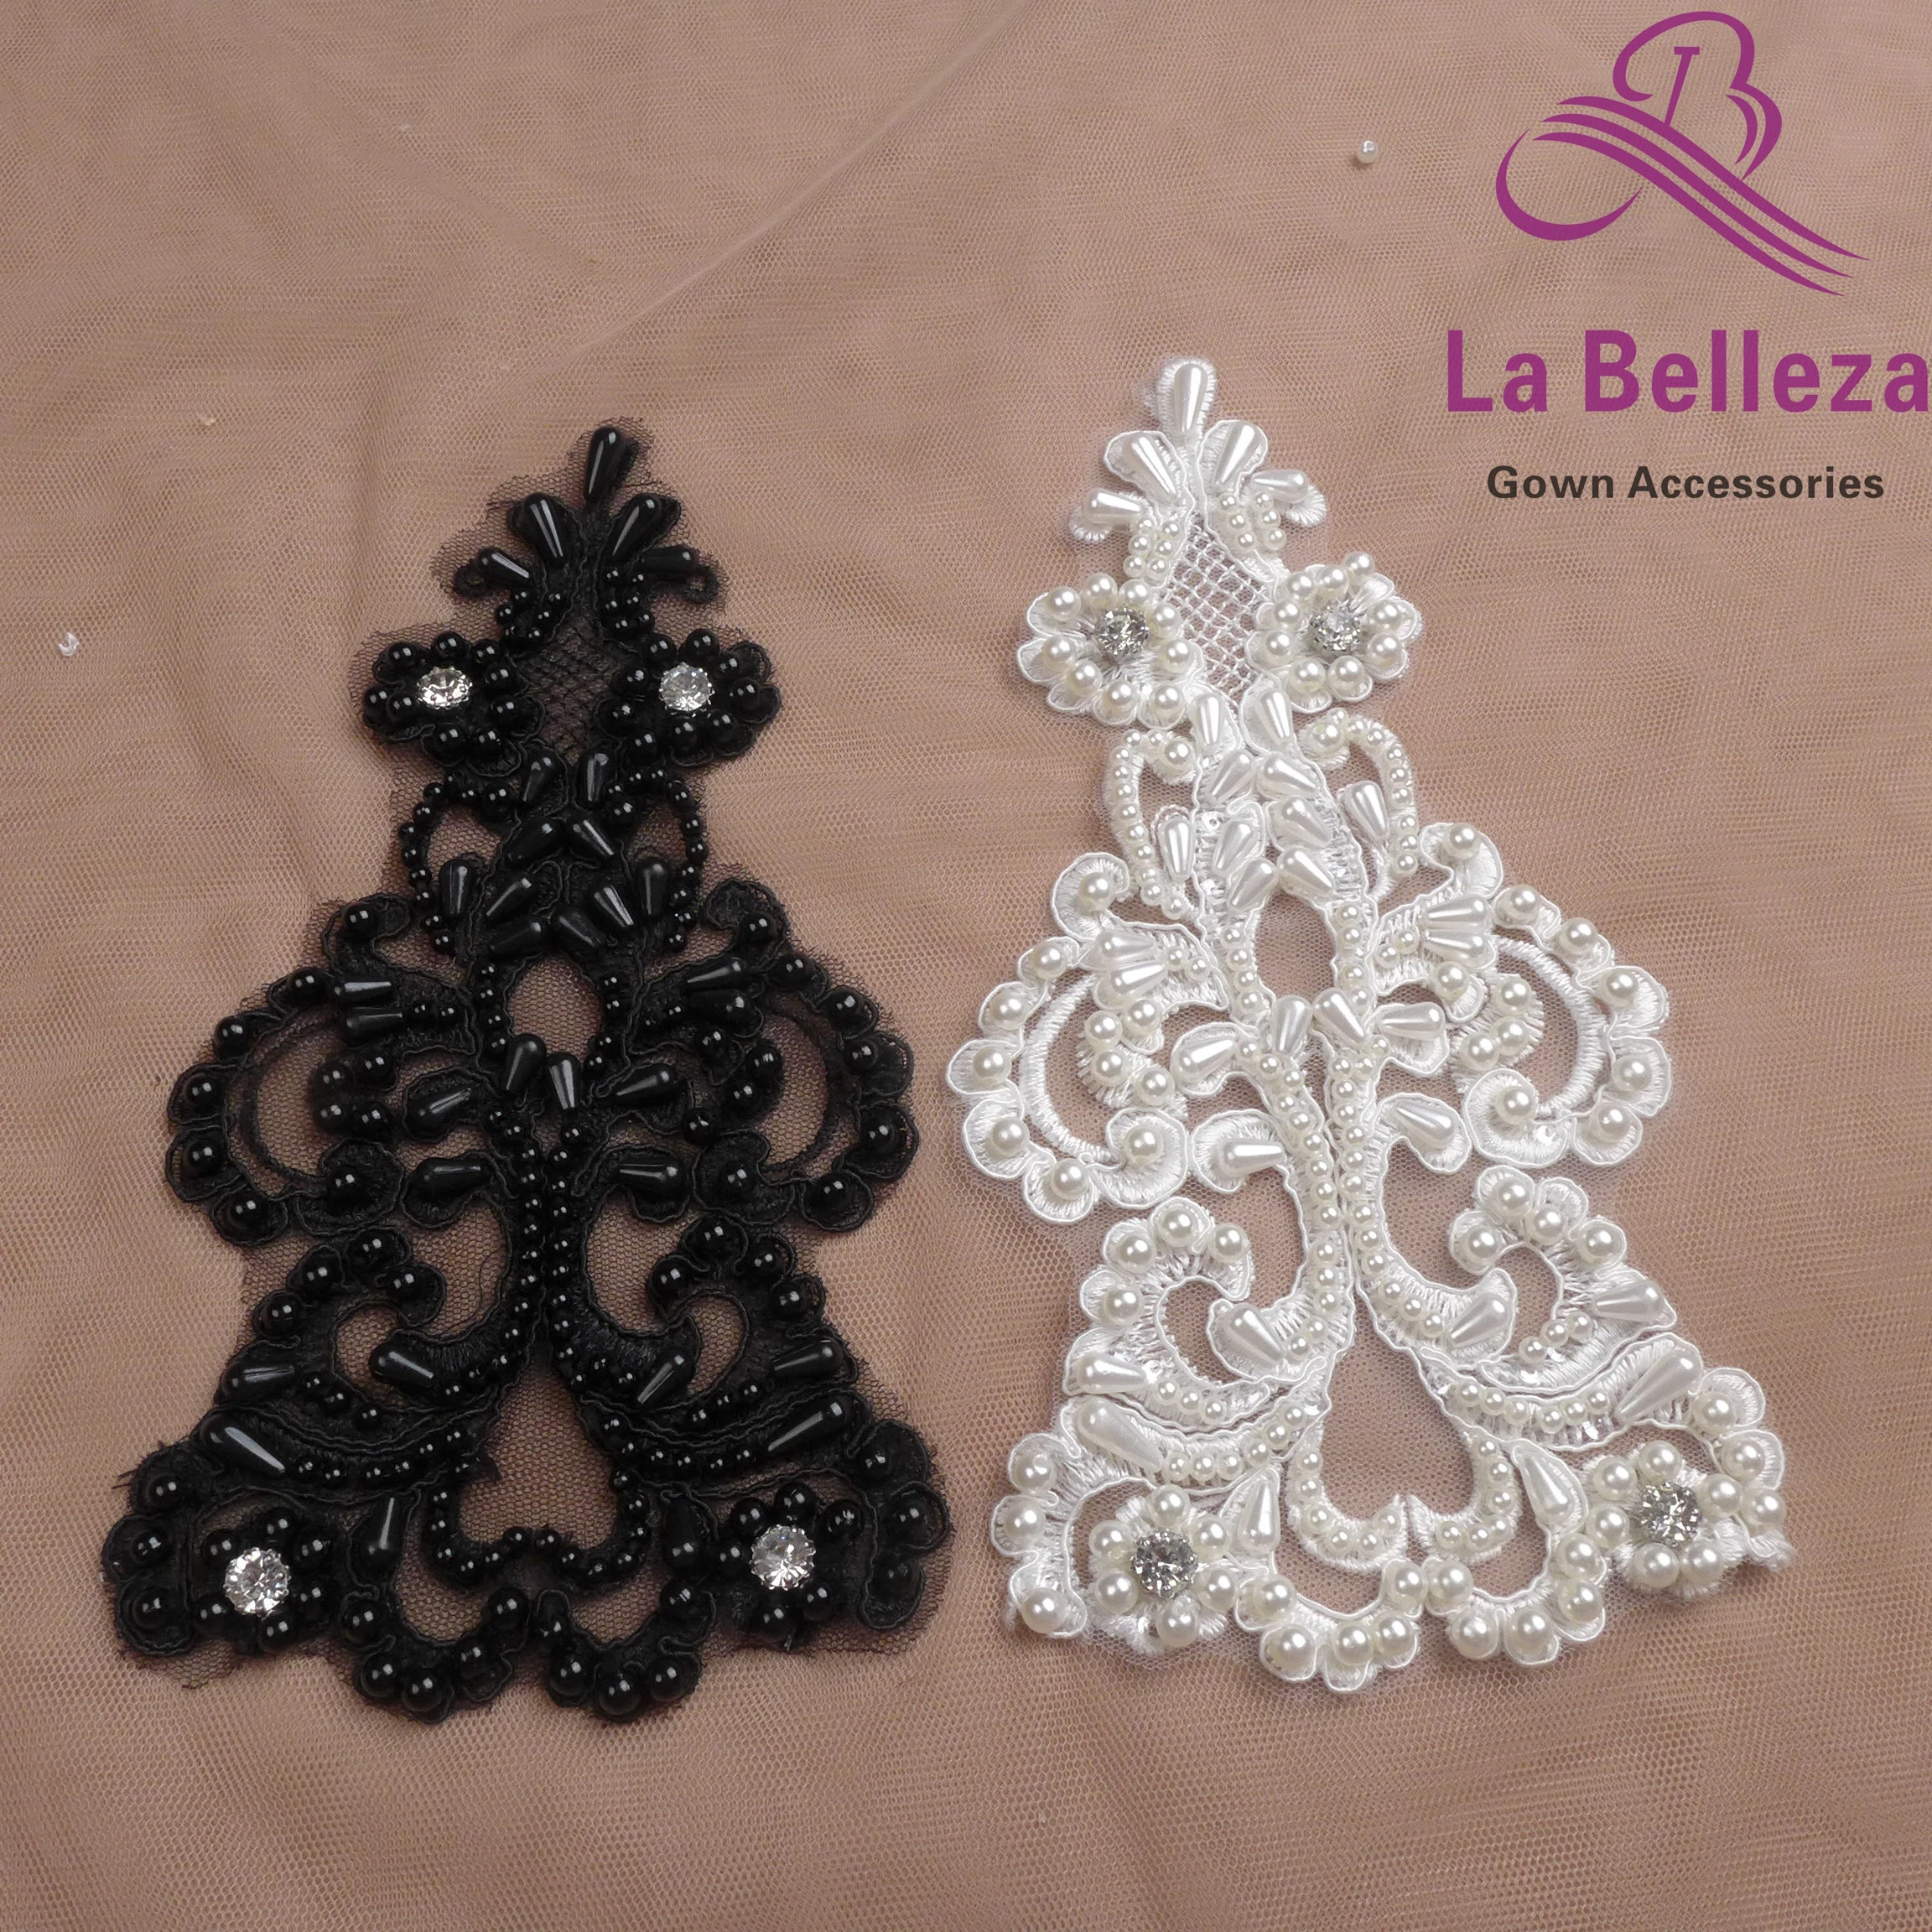 

2pieces/lot white/black handmade heavy beads applique patch ployester embroidery patch wedding dress Accessories